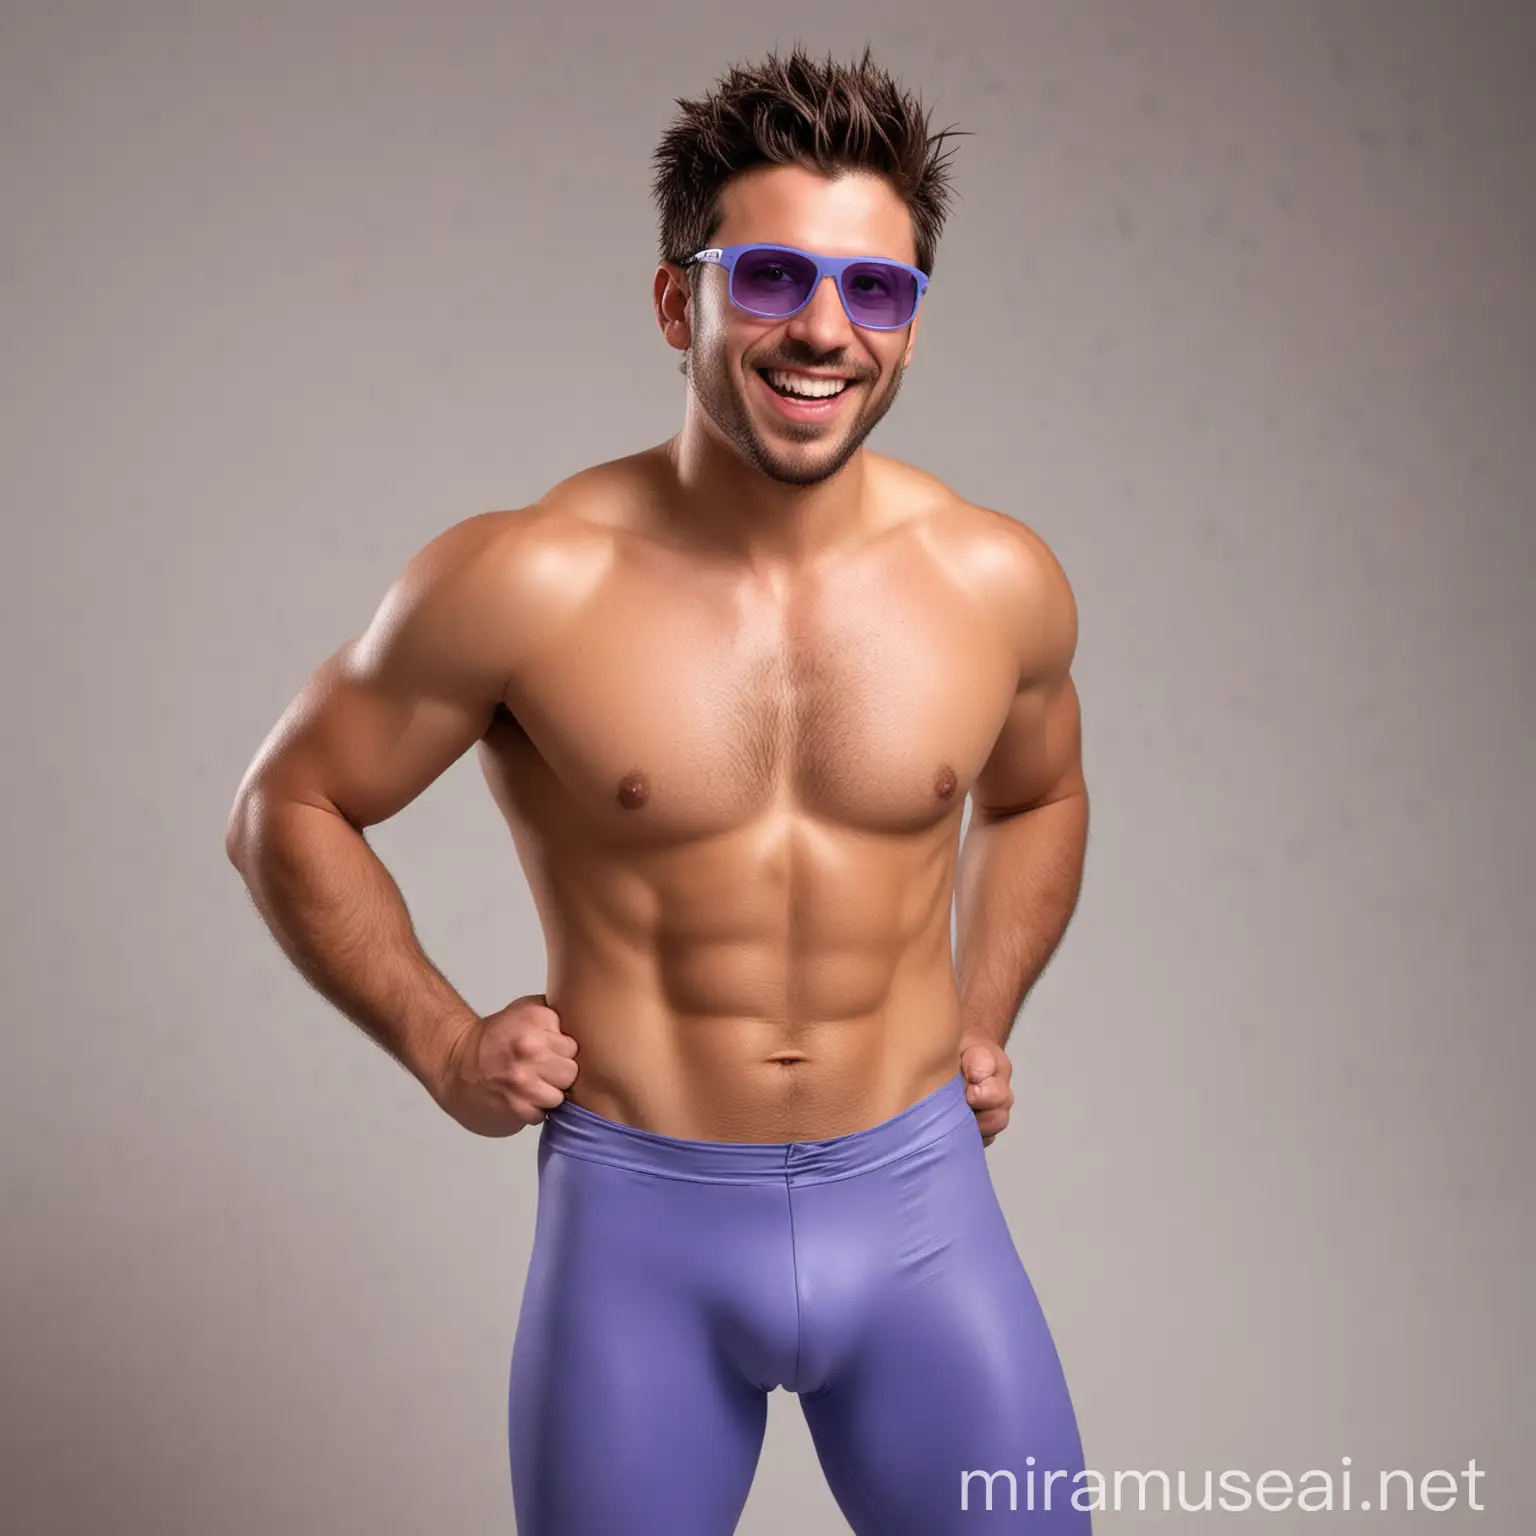 Confident Argentine Wrestler in Periwinkle Spandex Leggings Smiling and Winking